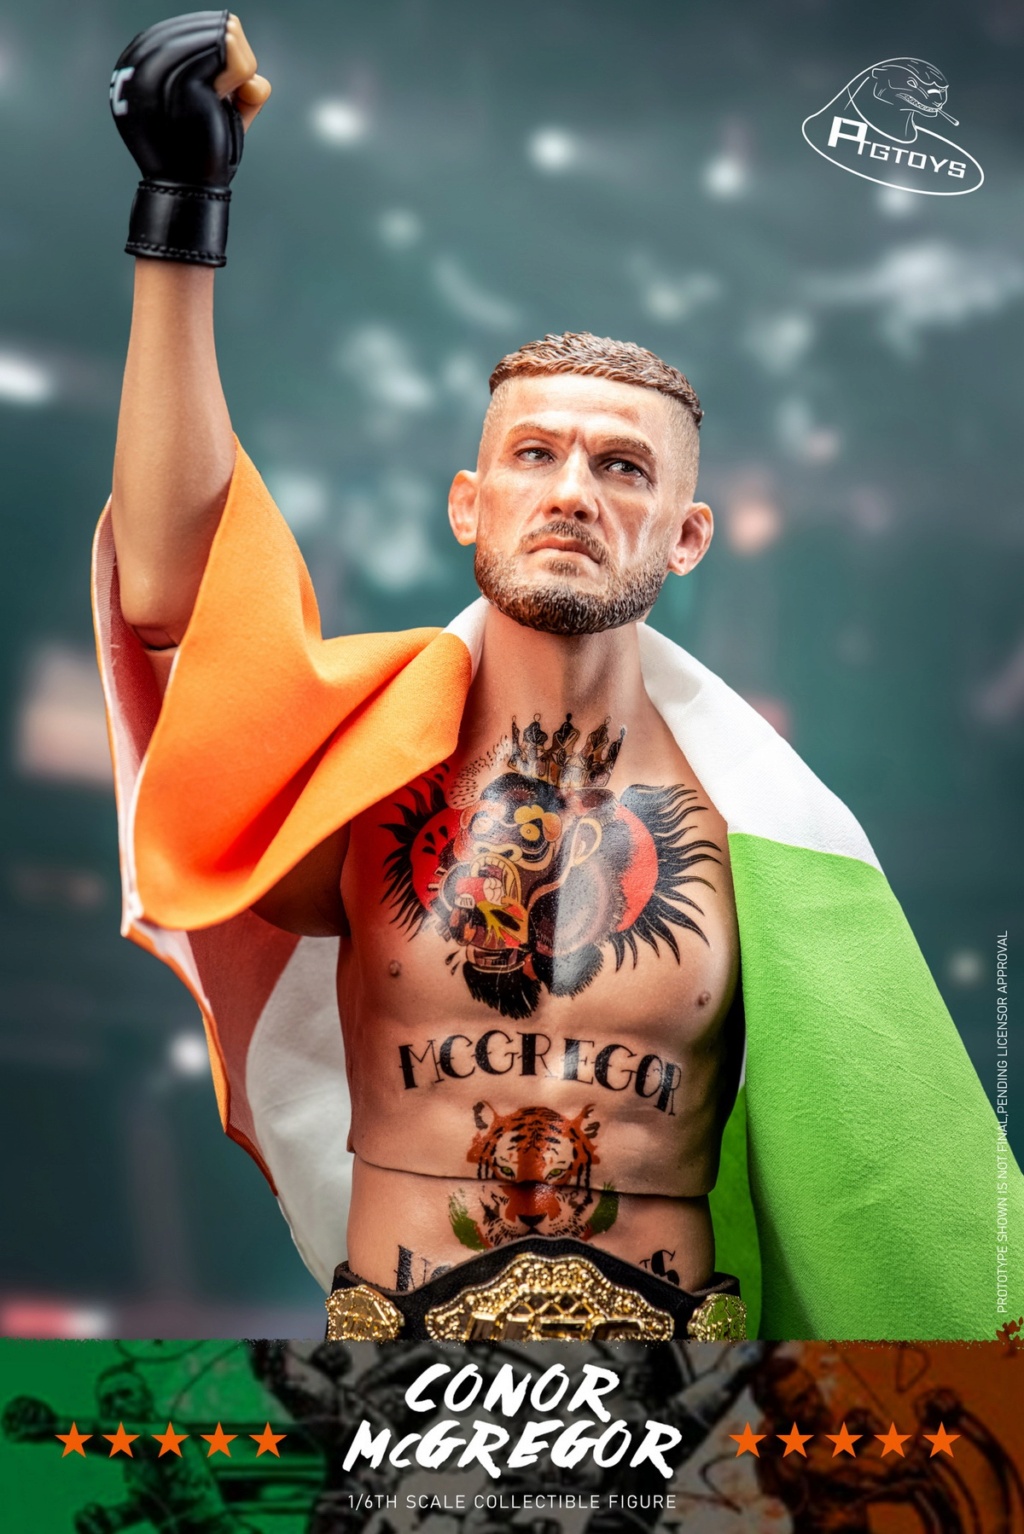 PTGToys - NEW PRODUCT: PTGToys: 1/6 Conor MCGREGOR Action Figure  16551411